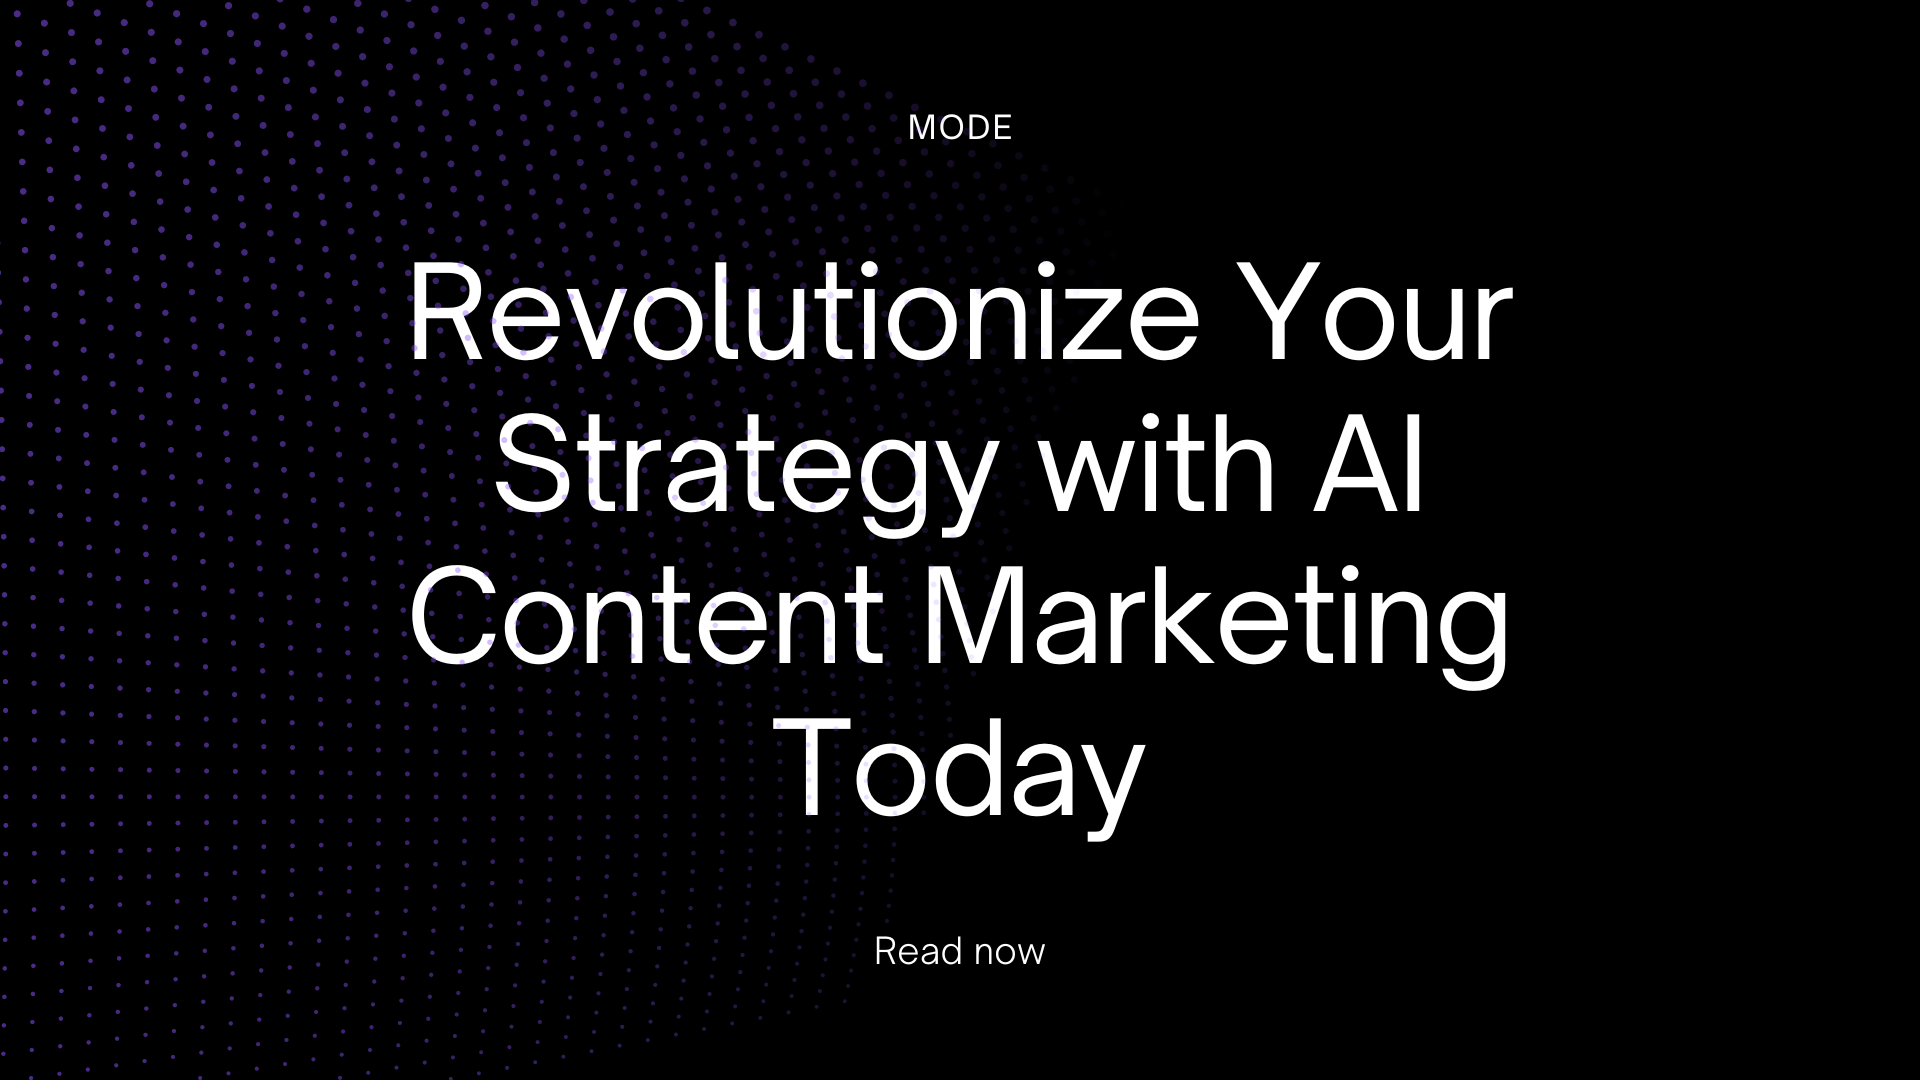 Revolutionize Your Strategy with AI Content Marketing Today